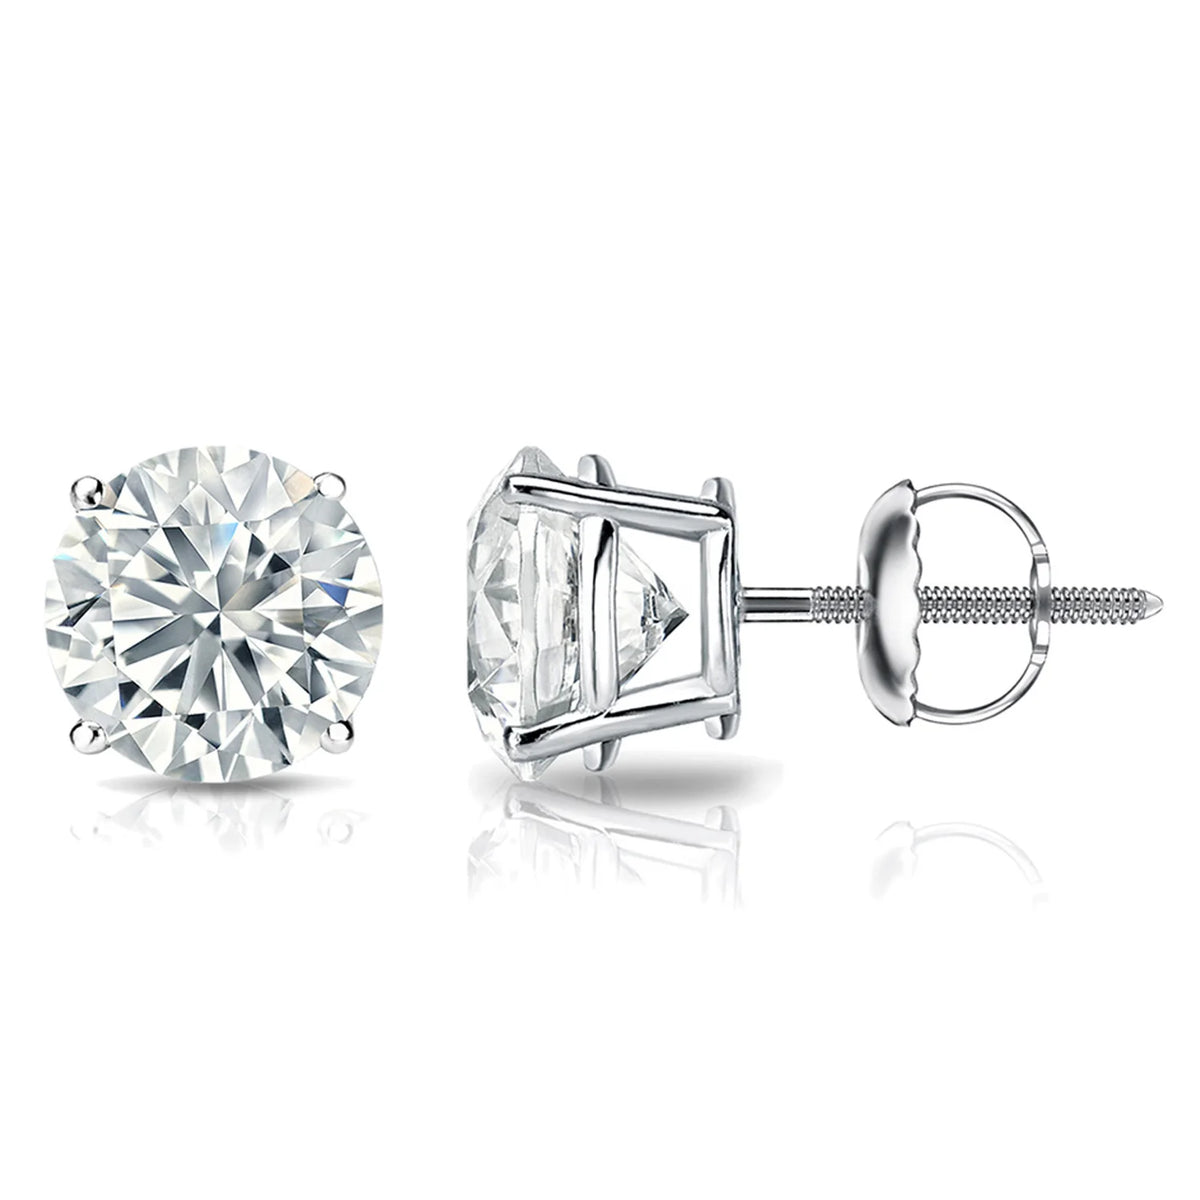 1 Carat Round 14K White Gold 4 Prong Basket Set Diamond Solitaire Stud Earrings (Valentine&#39;s Day Special)